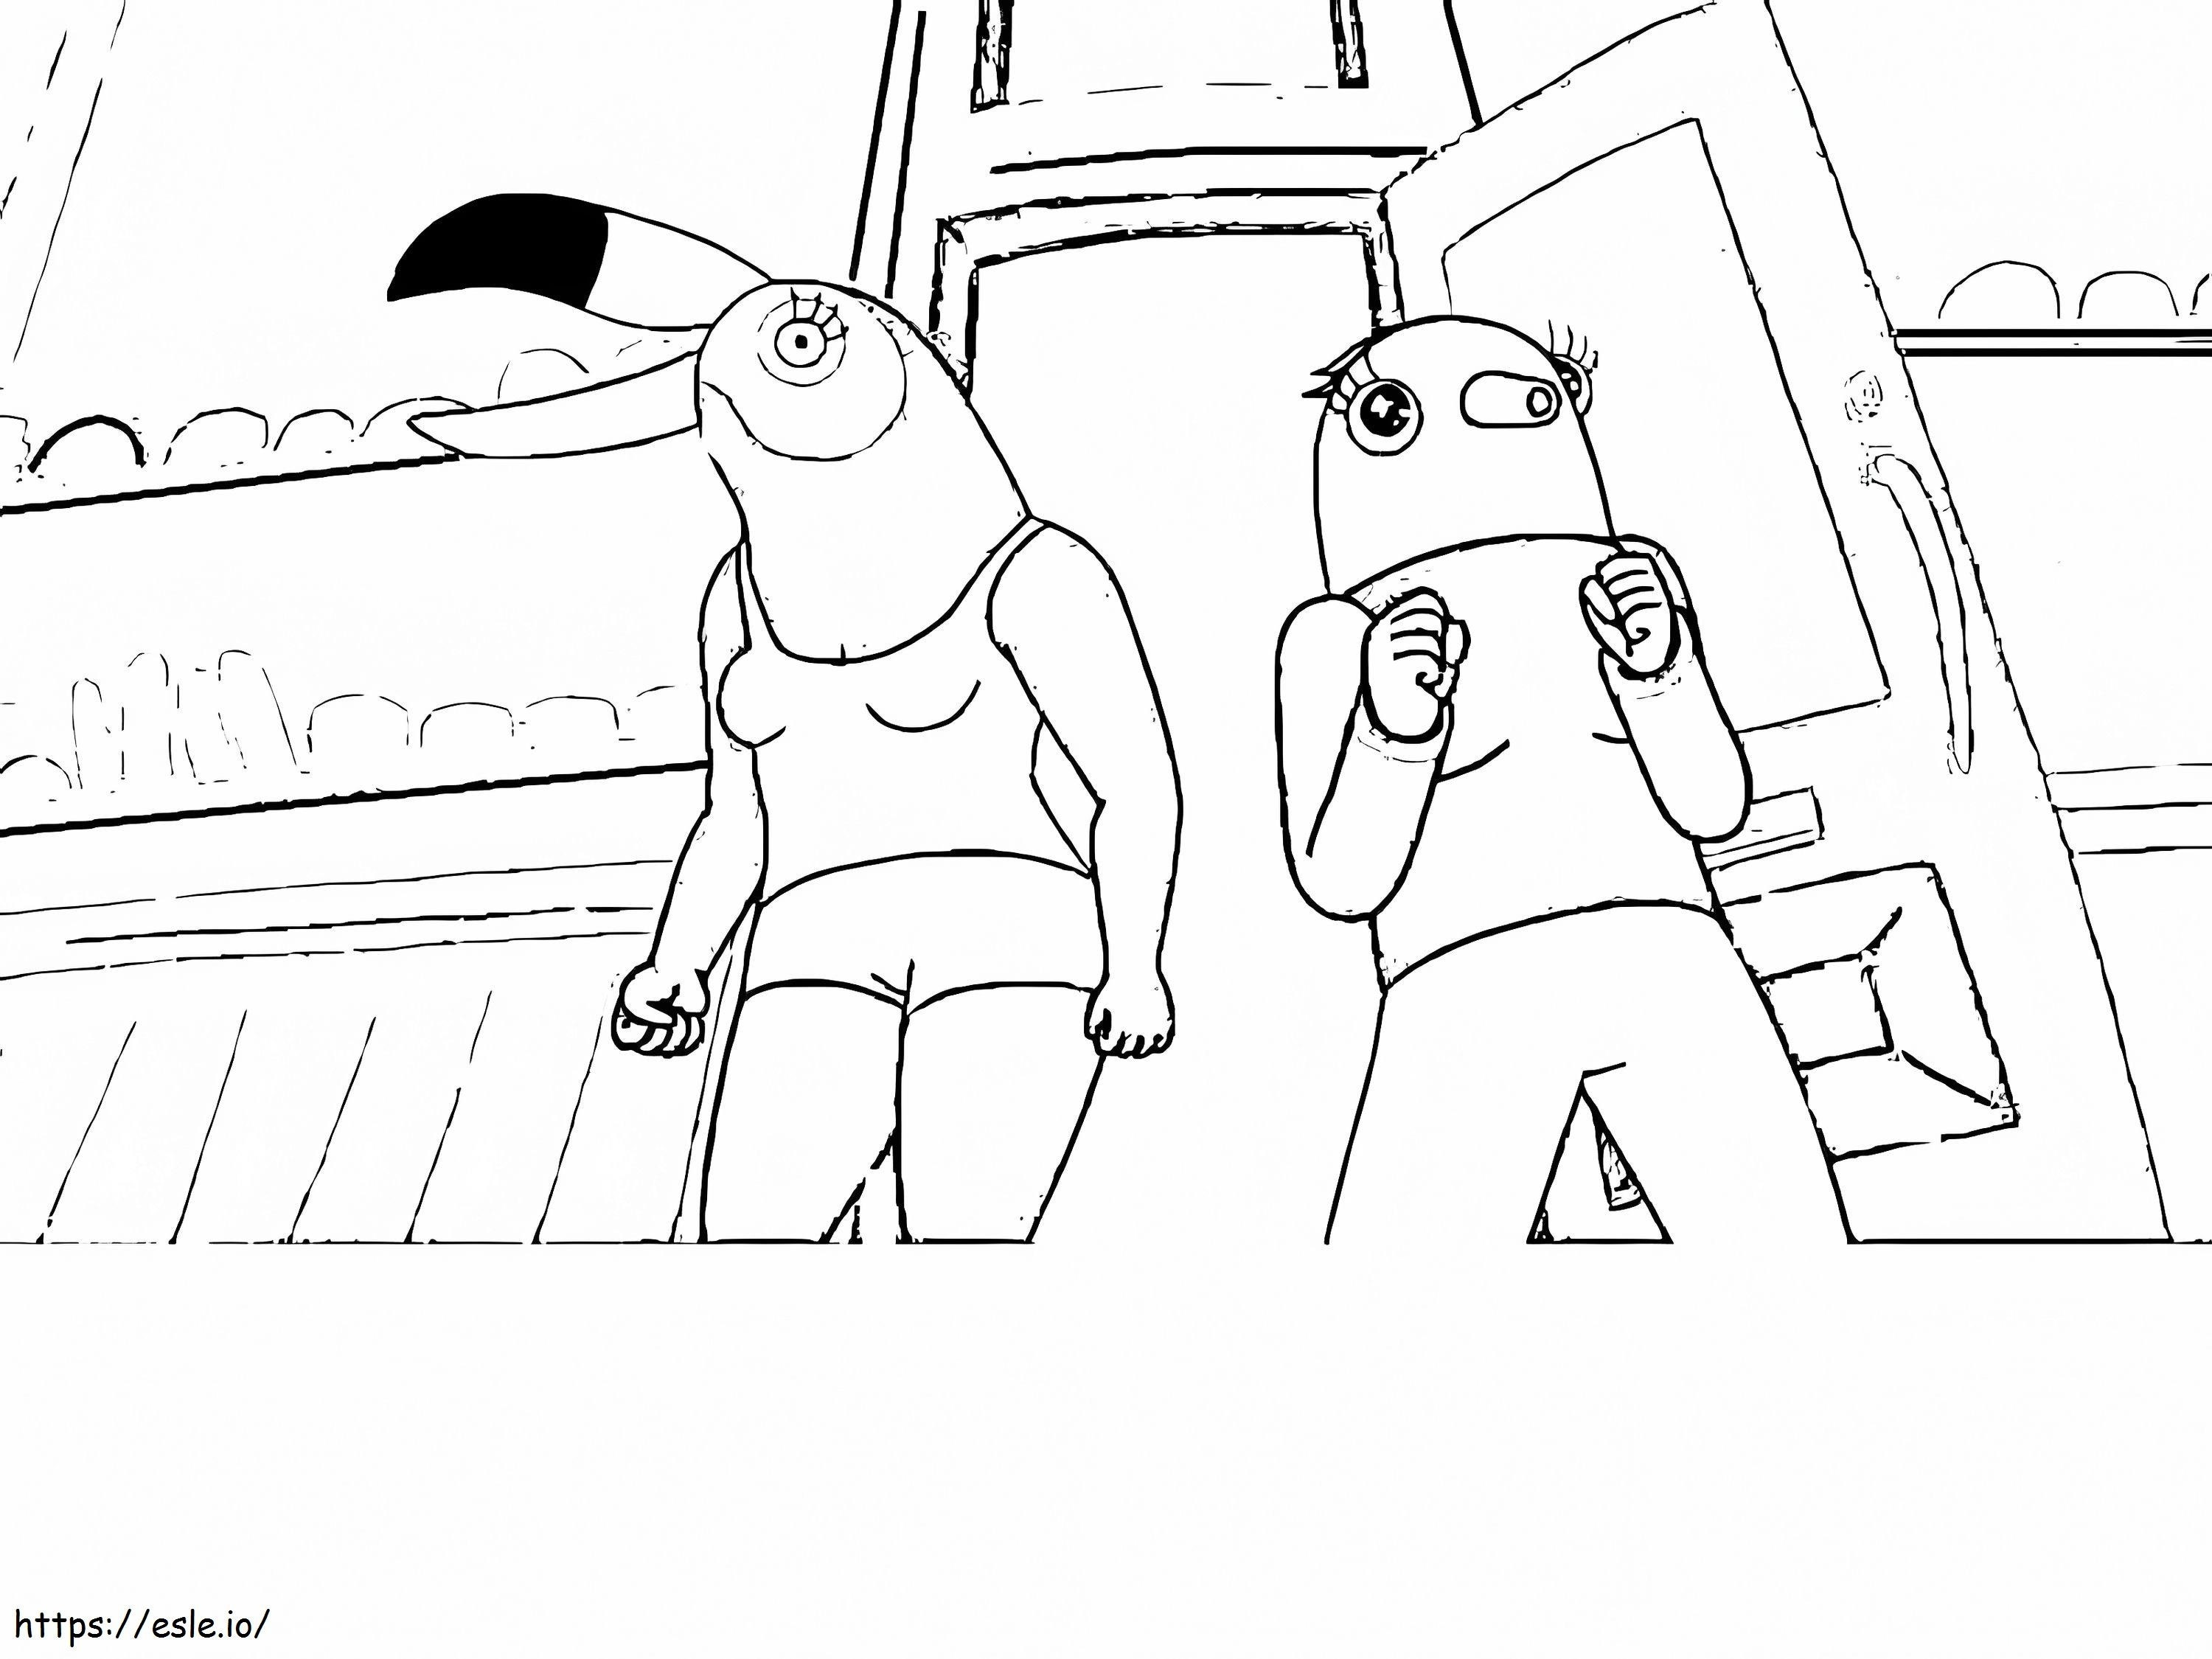 Tuca And Bertie 1 coloring page